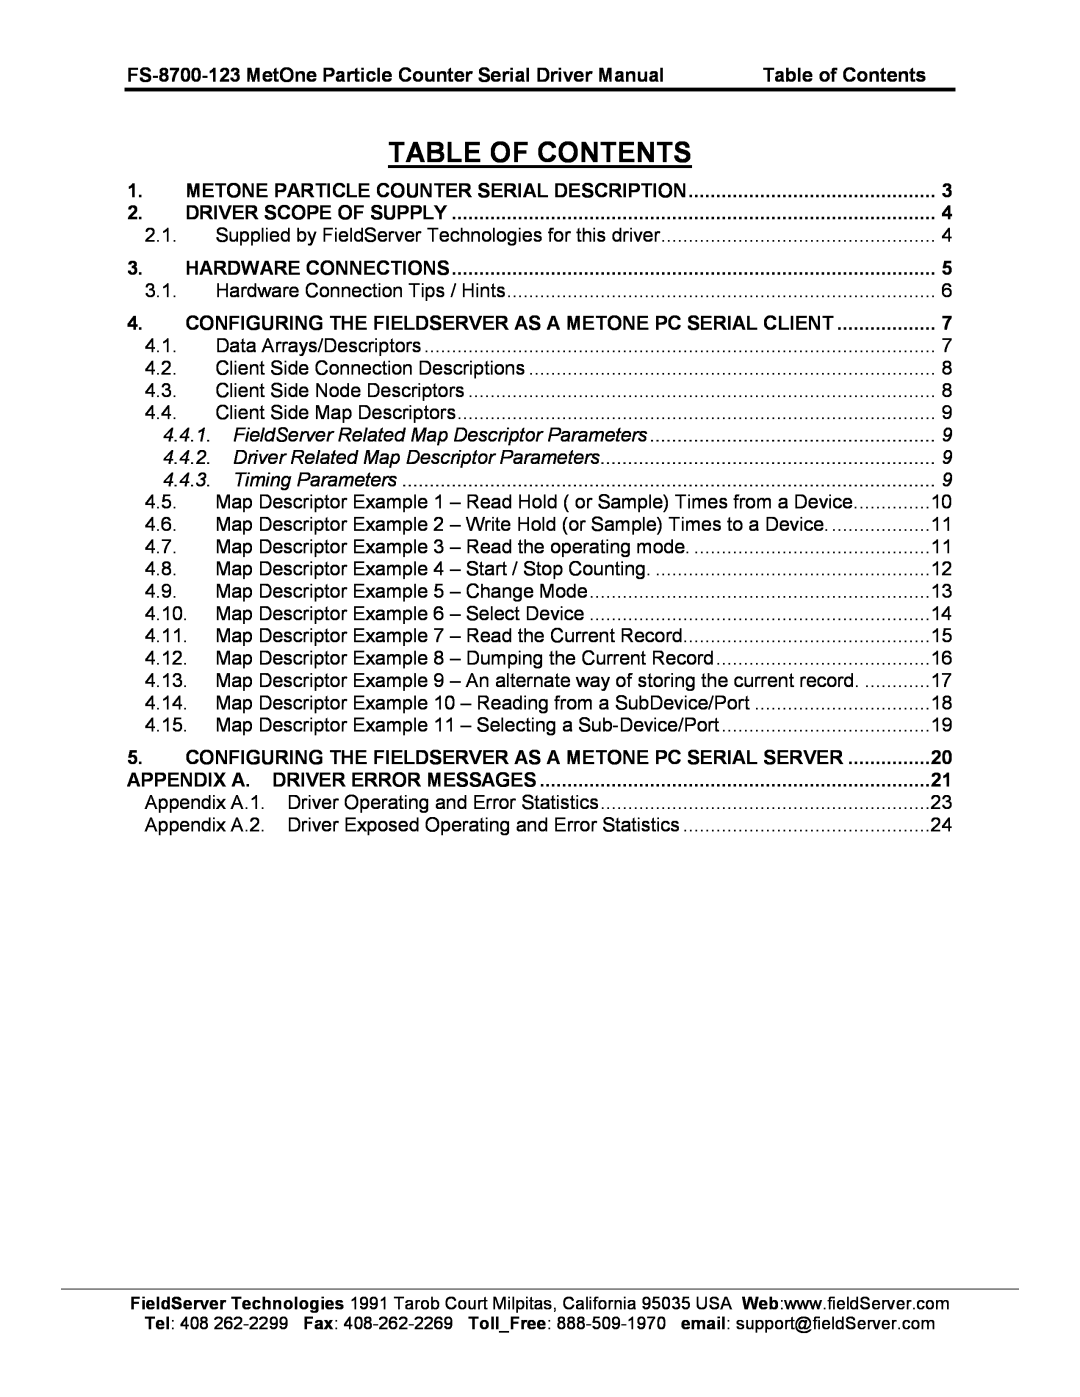 FieldServer FS-8700-123 instruction manual Table Of Contents 